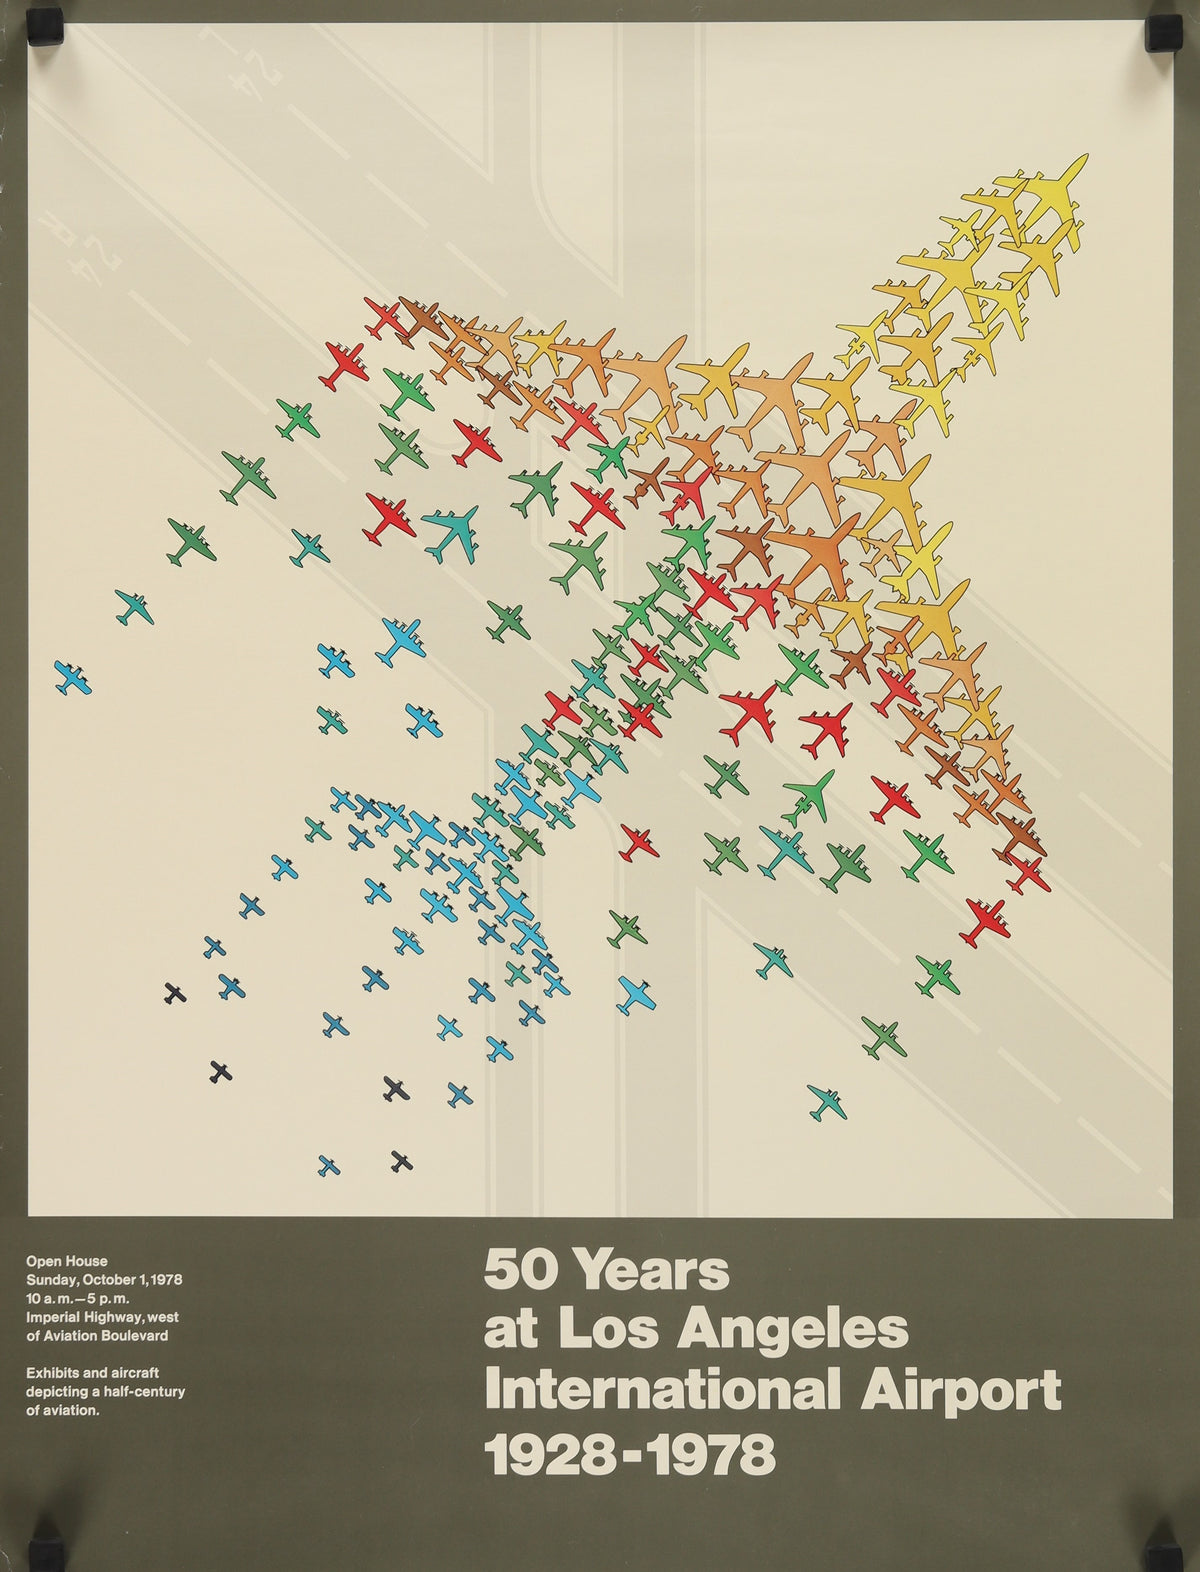 50 Years at LAX - Authentic Vintage Poster